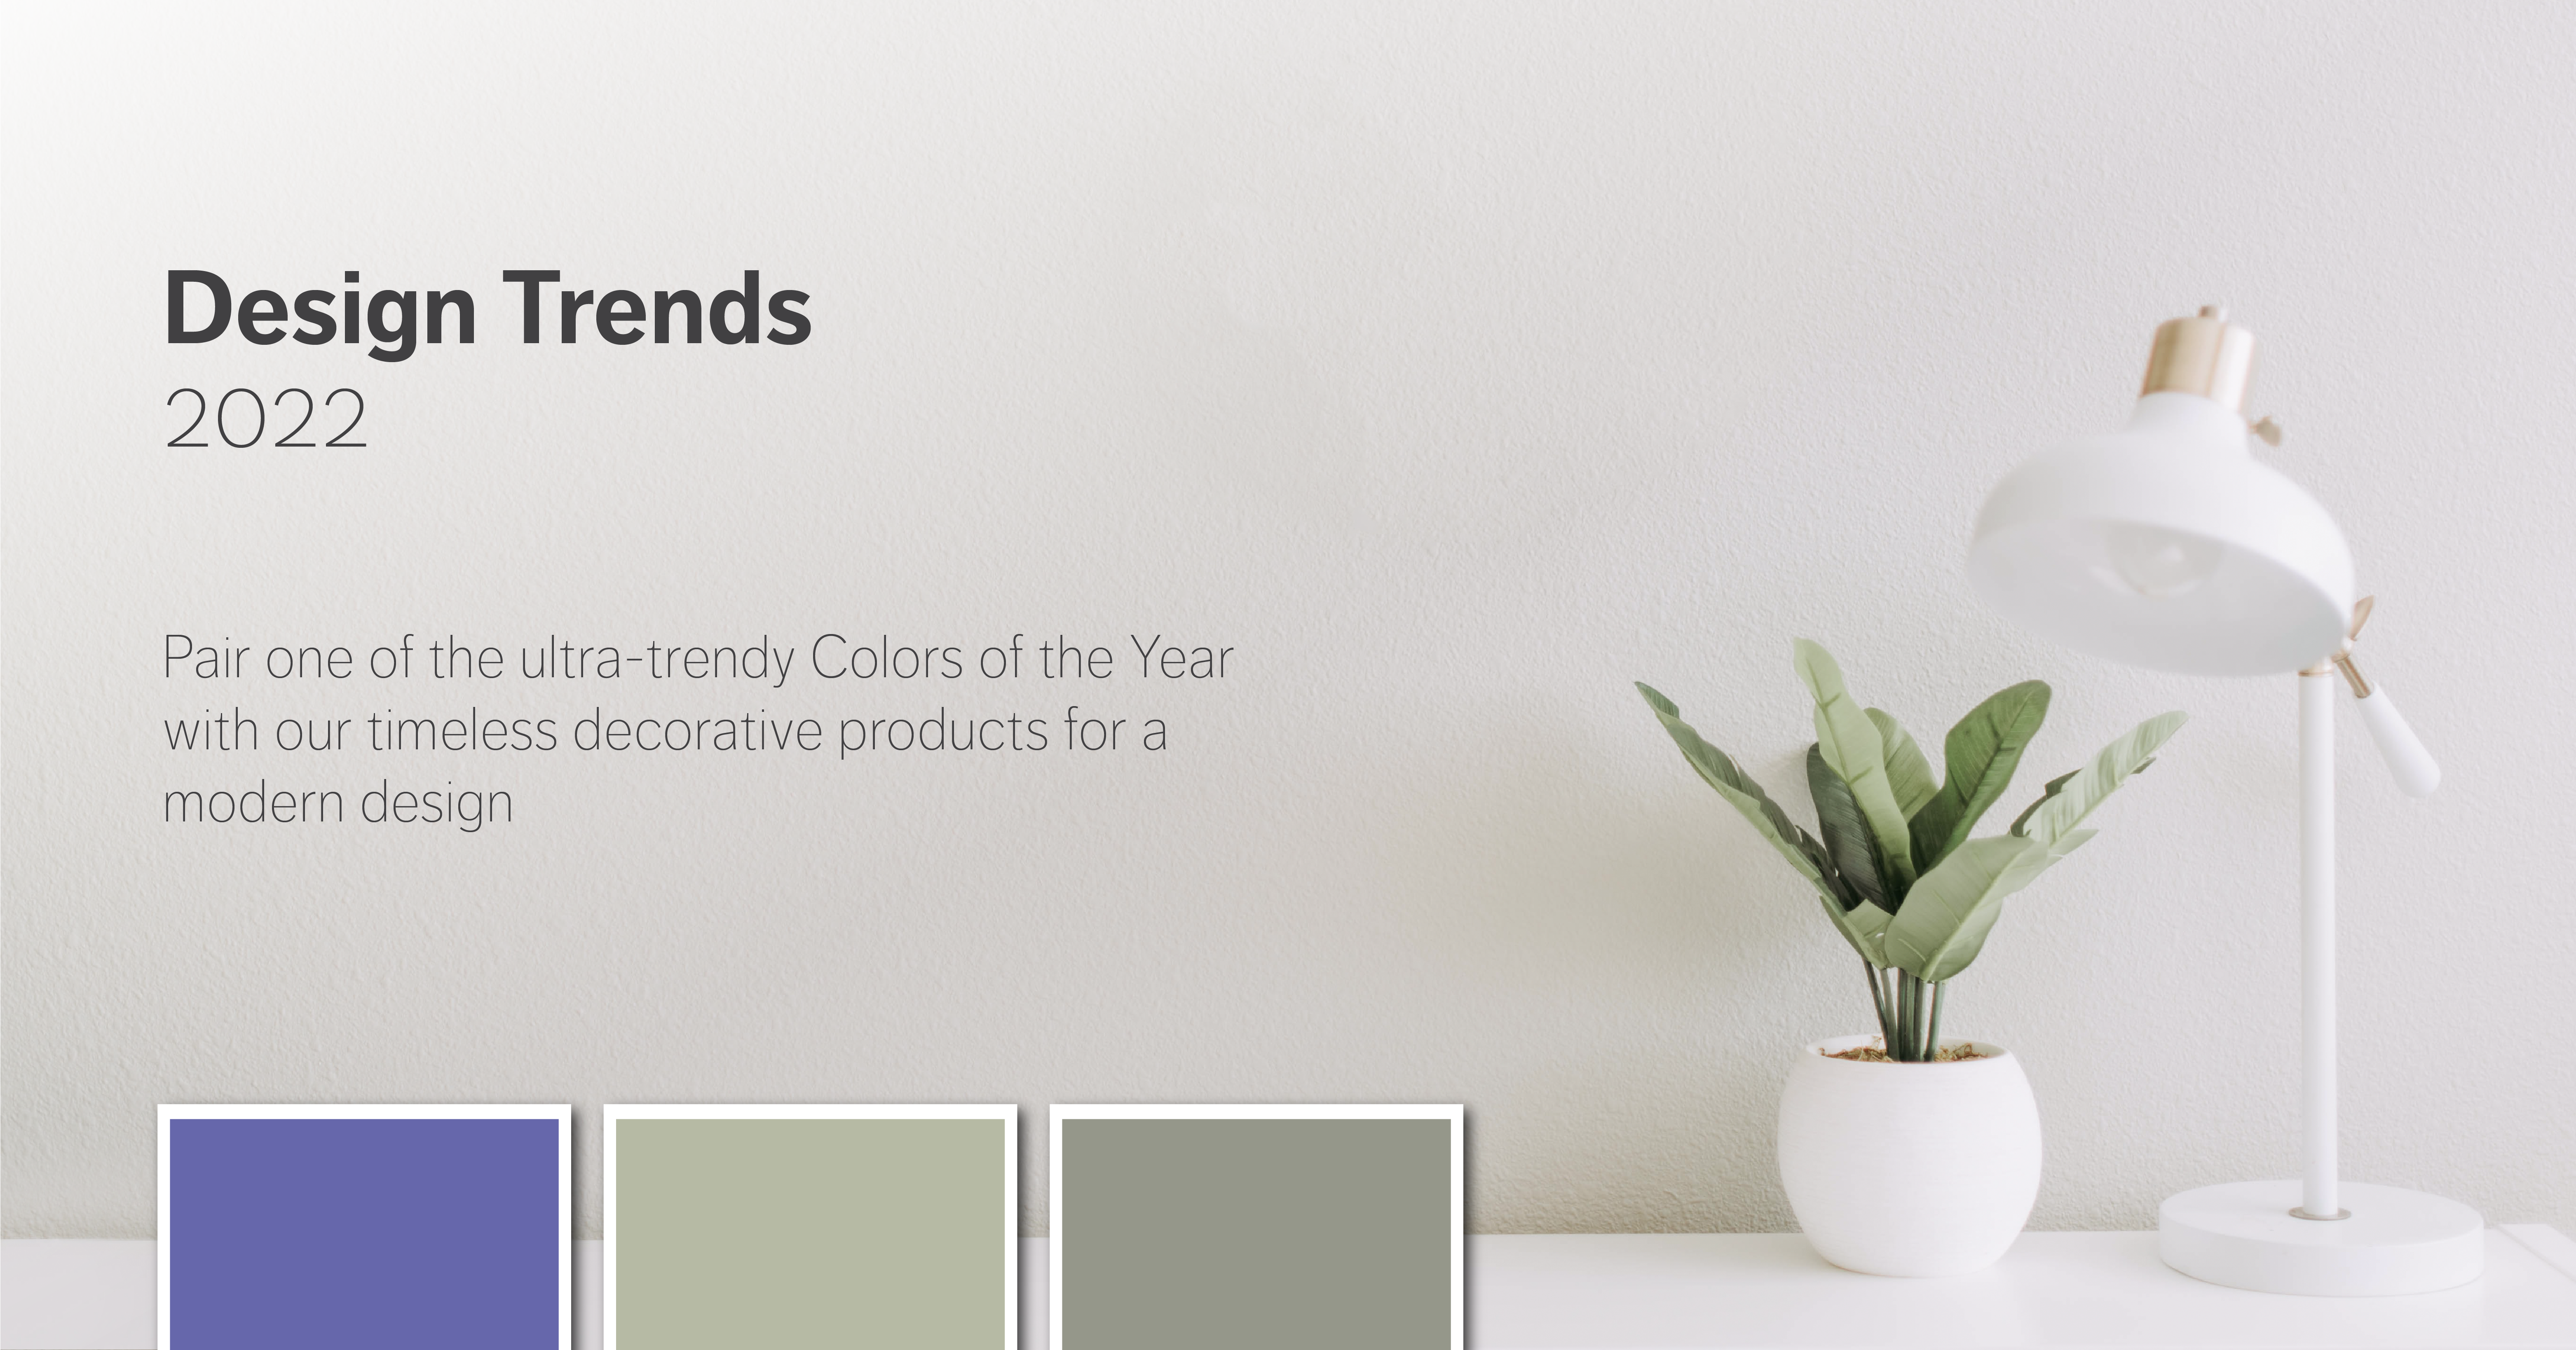 A white lamp and potted plant sit on a white desk. The words "Design trends 2022" are overlaid.